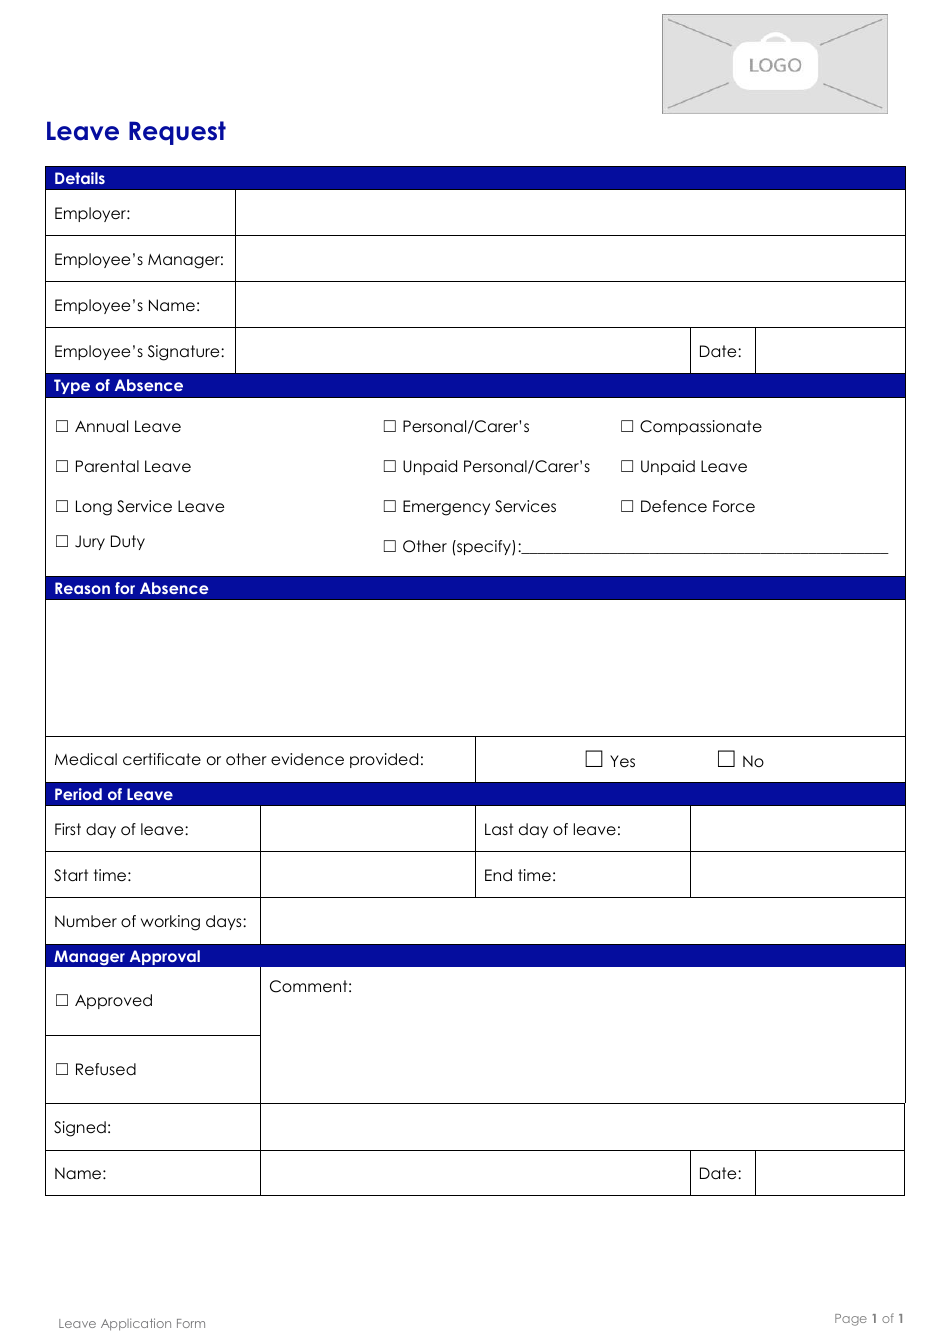 Leave Application Form - Blue, Page 1